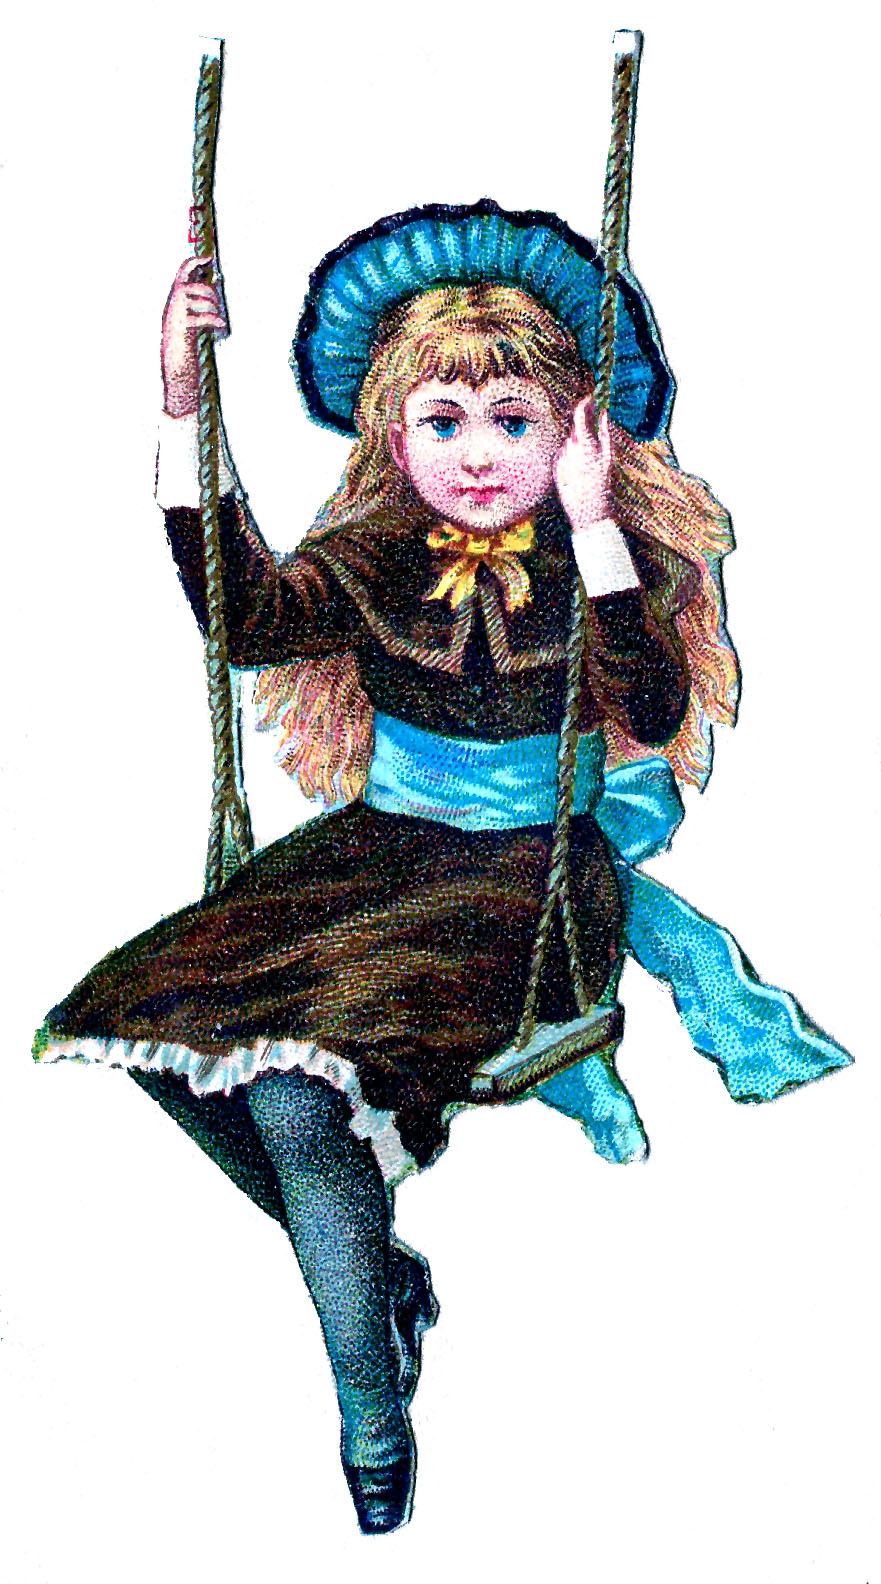 Vintage Clip Art - Little Victorian Girl on Swing - The Graphics Fairy